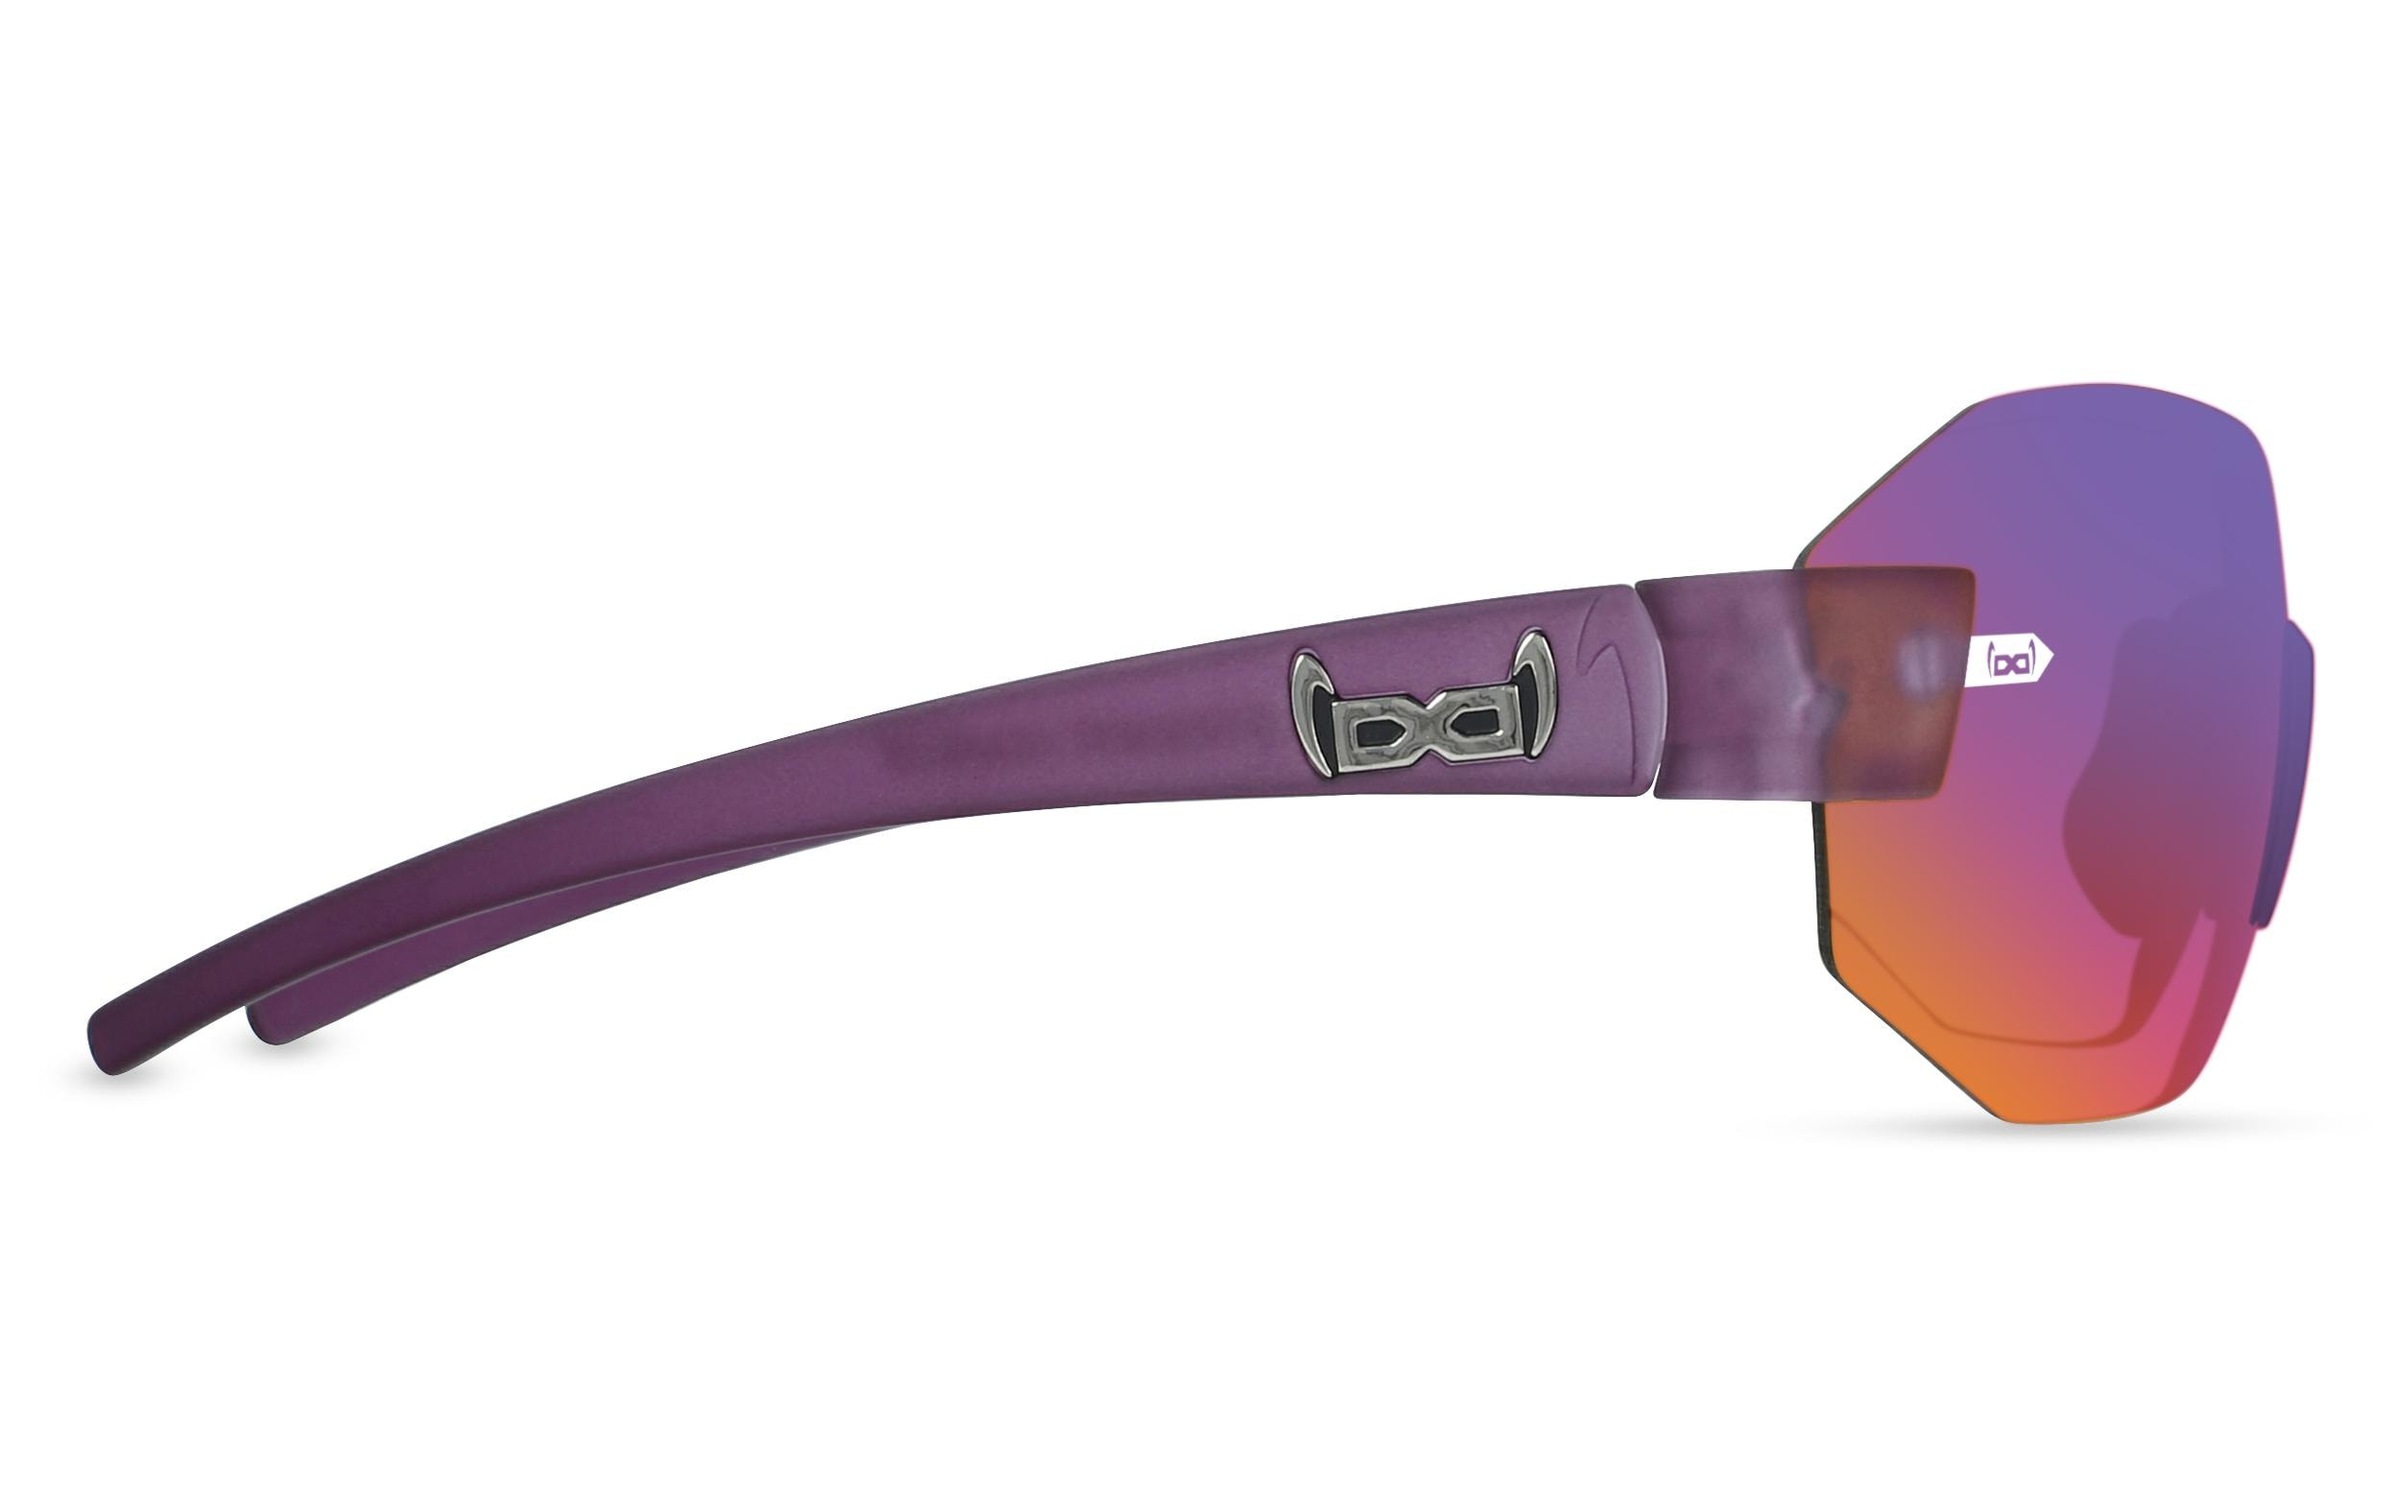 gloryfy Sonnenbrille »G11 RAD violet by Laura S«